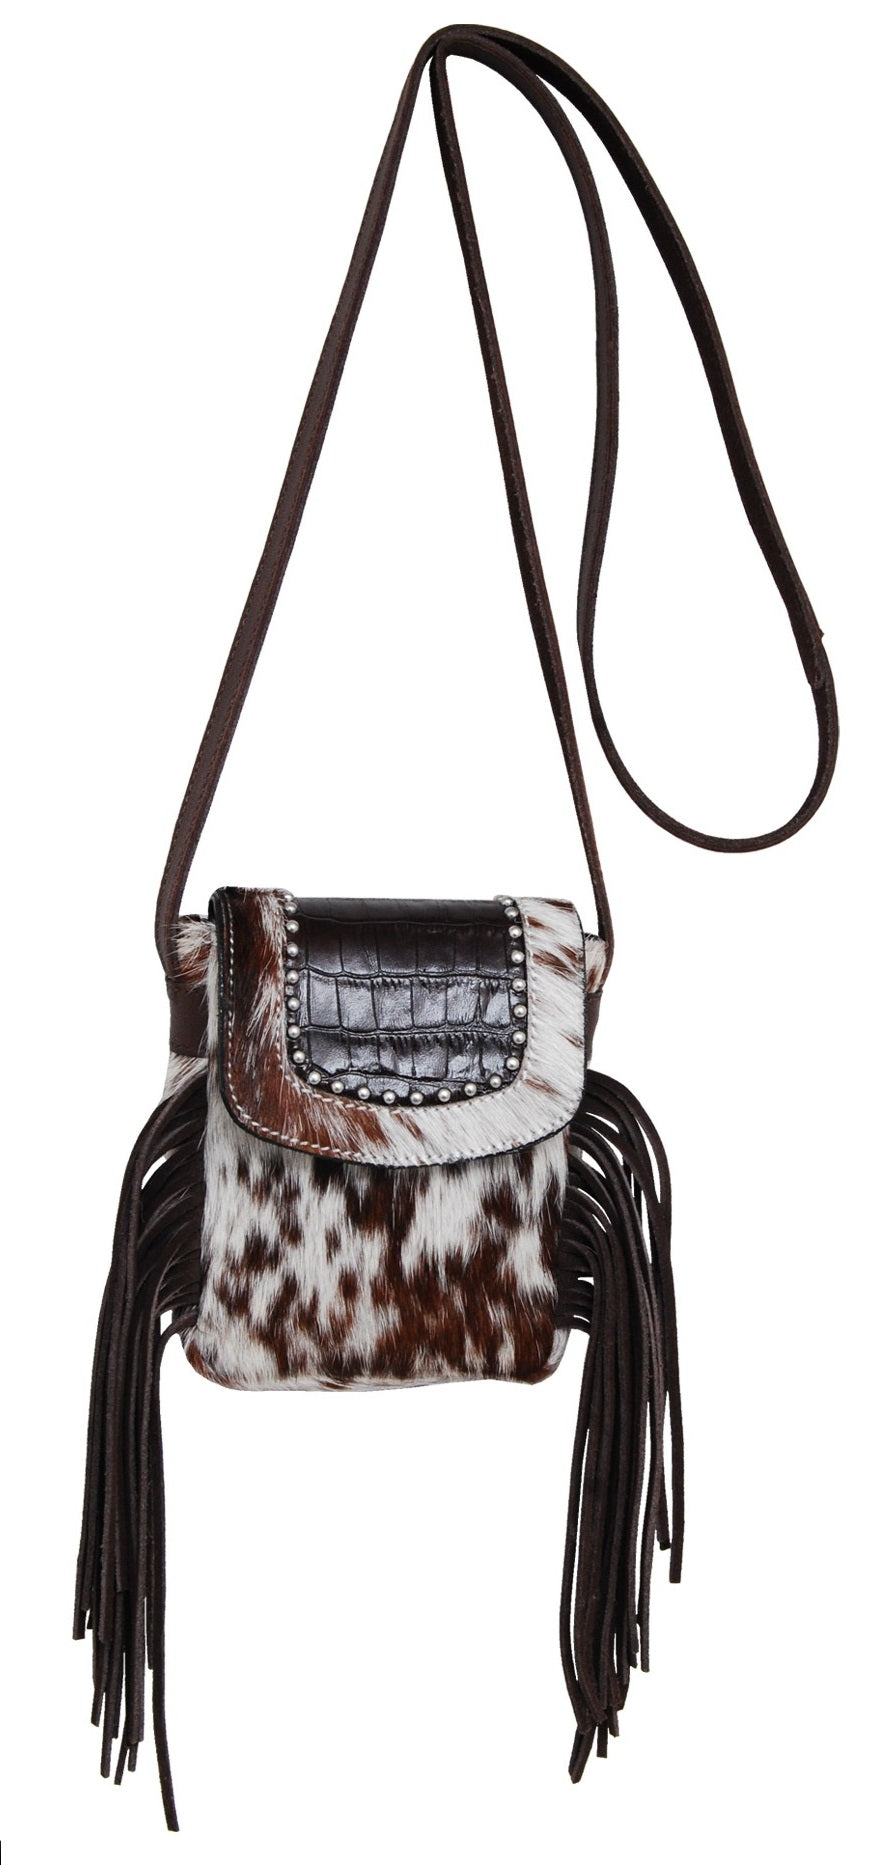 Cowhide Kids Hand Bag with Gator Print, SS Spots & Fringes